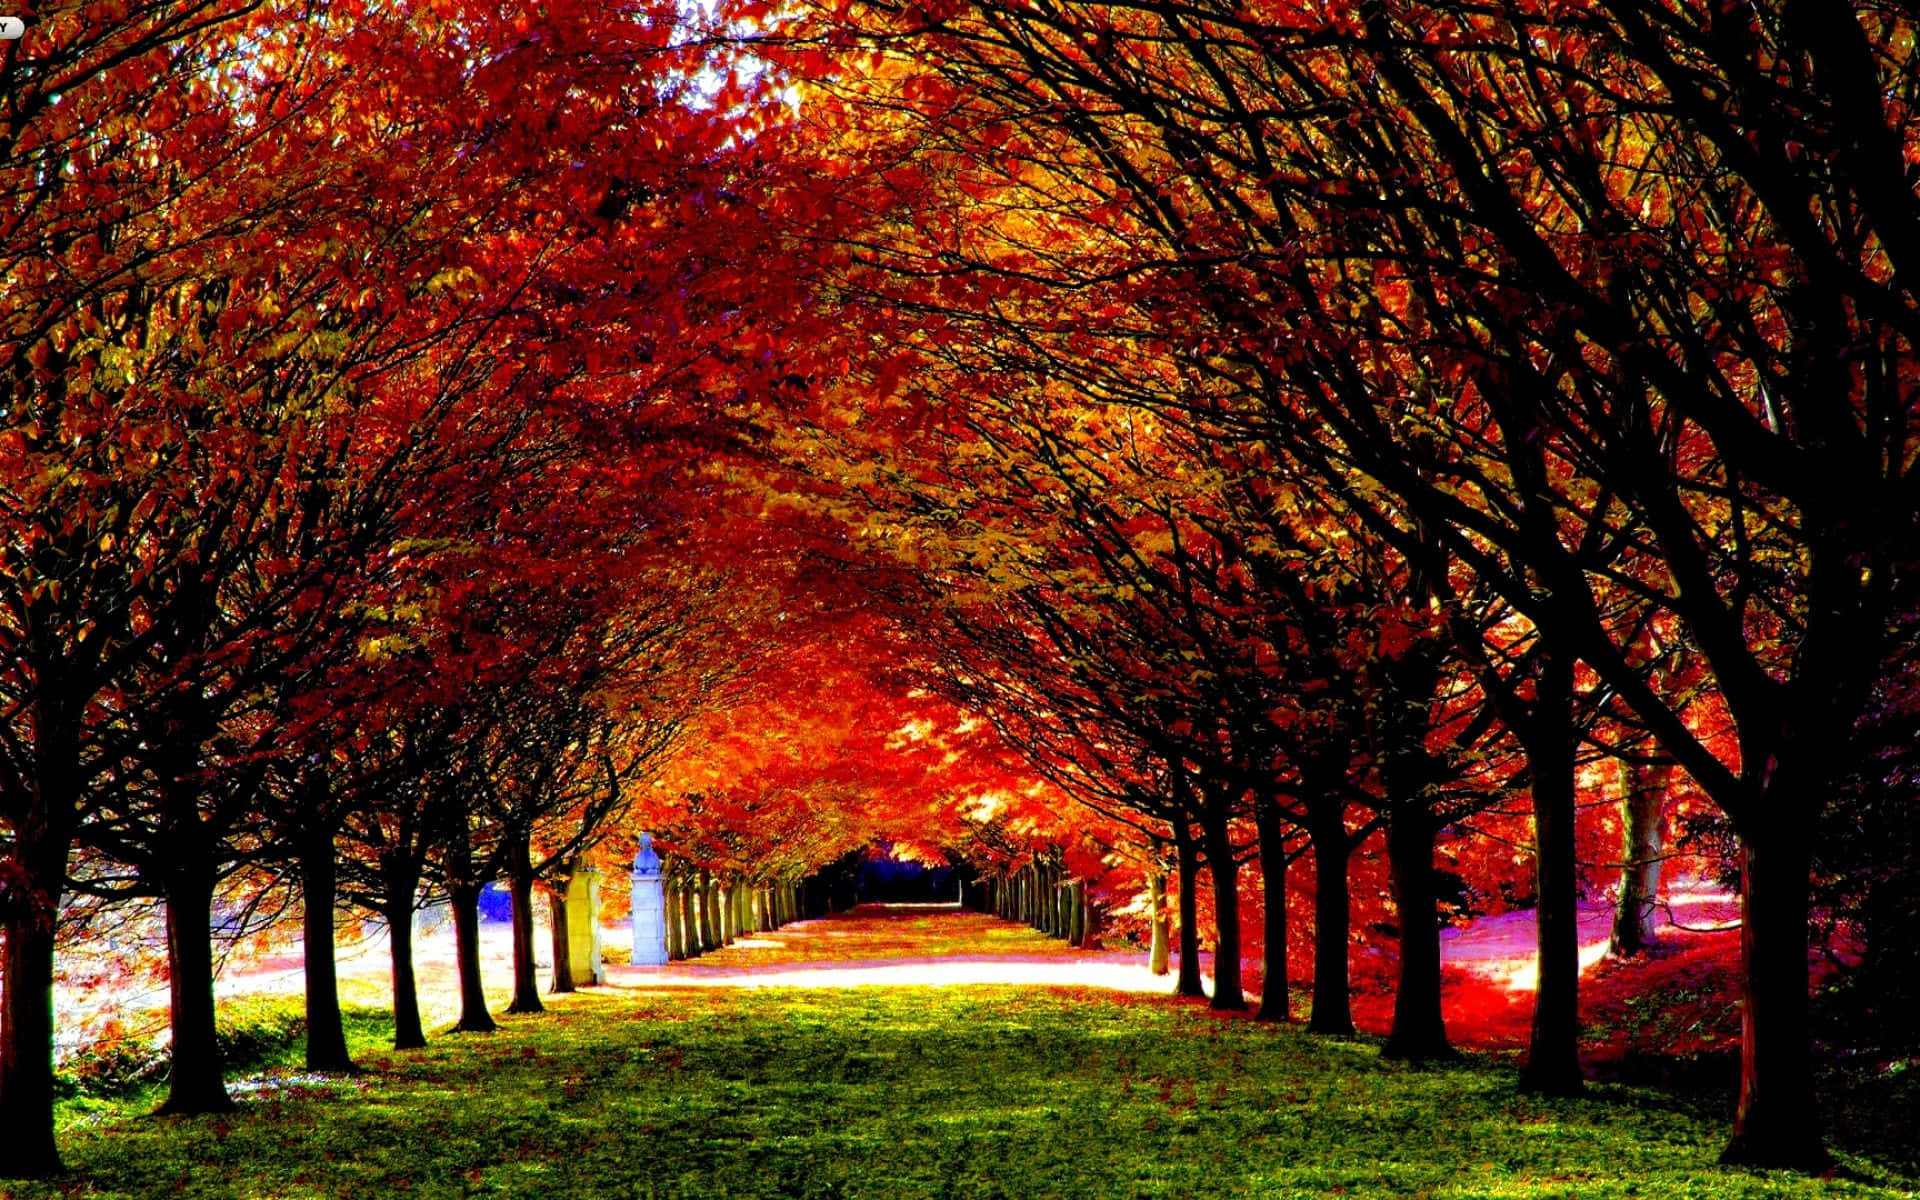 Enjoy the warm and vibrant colors of fall foliage Wallpaper